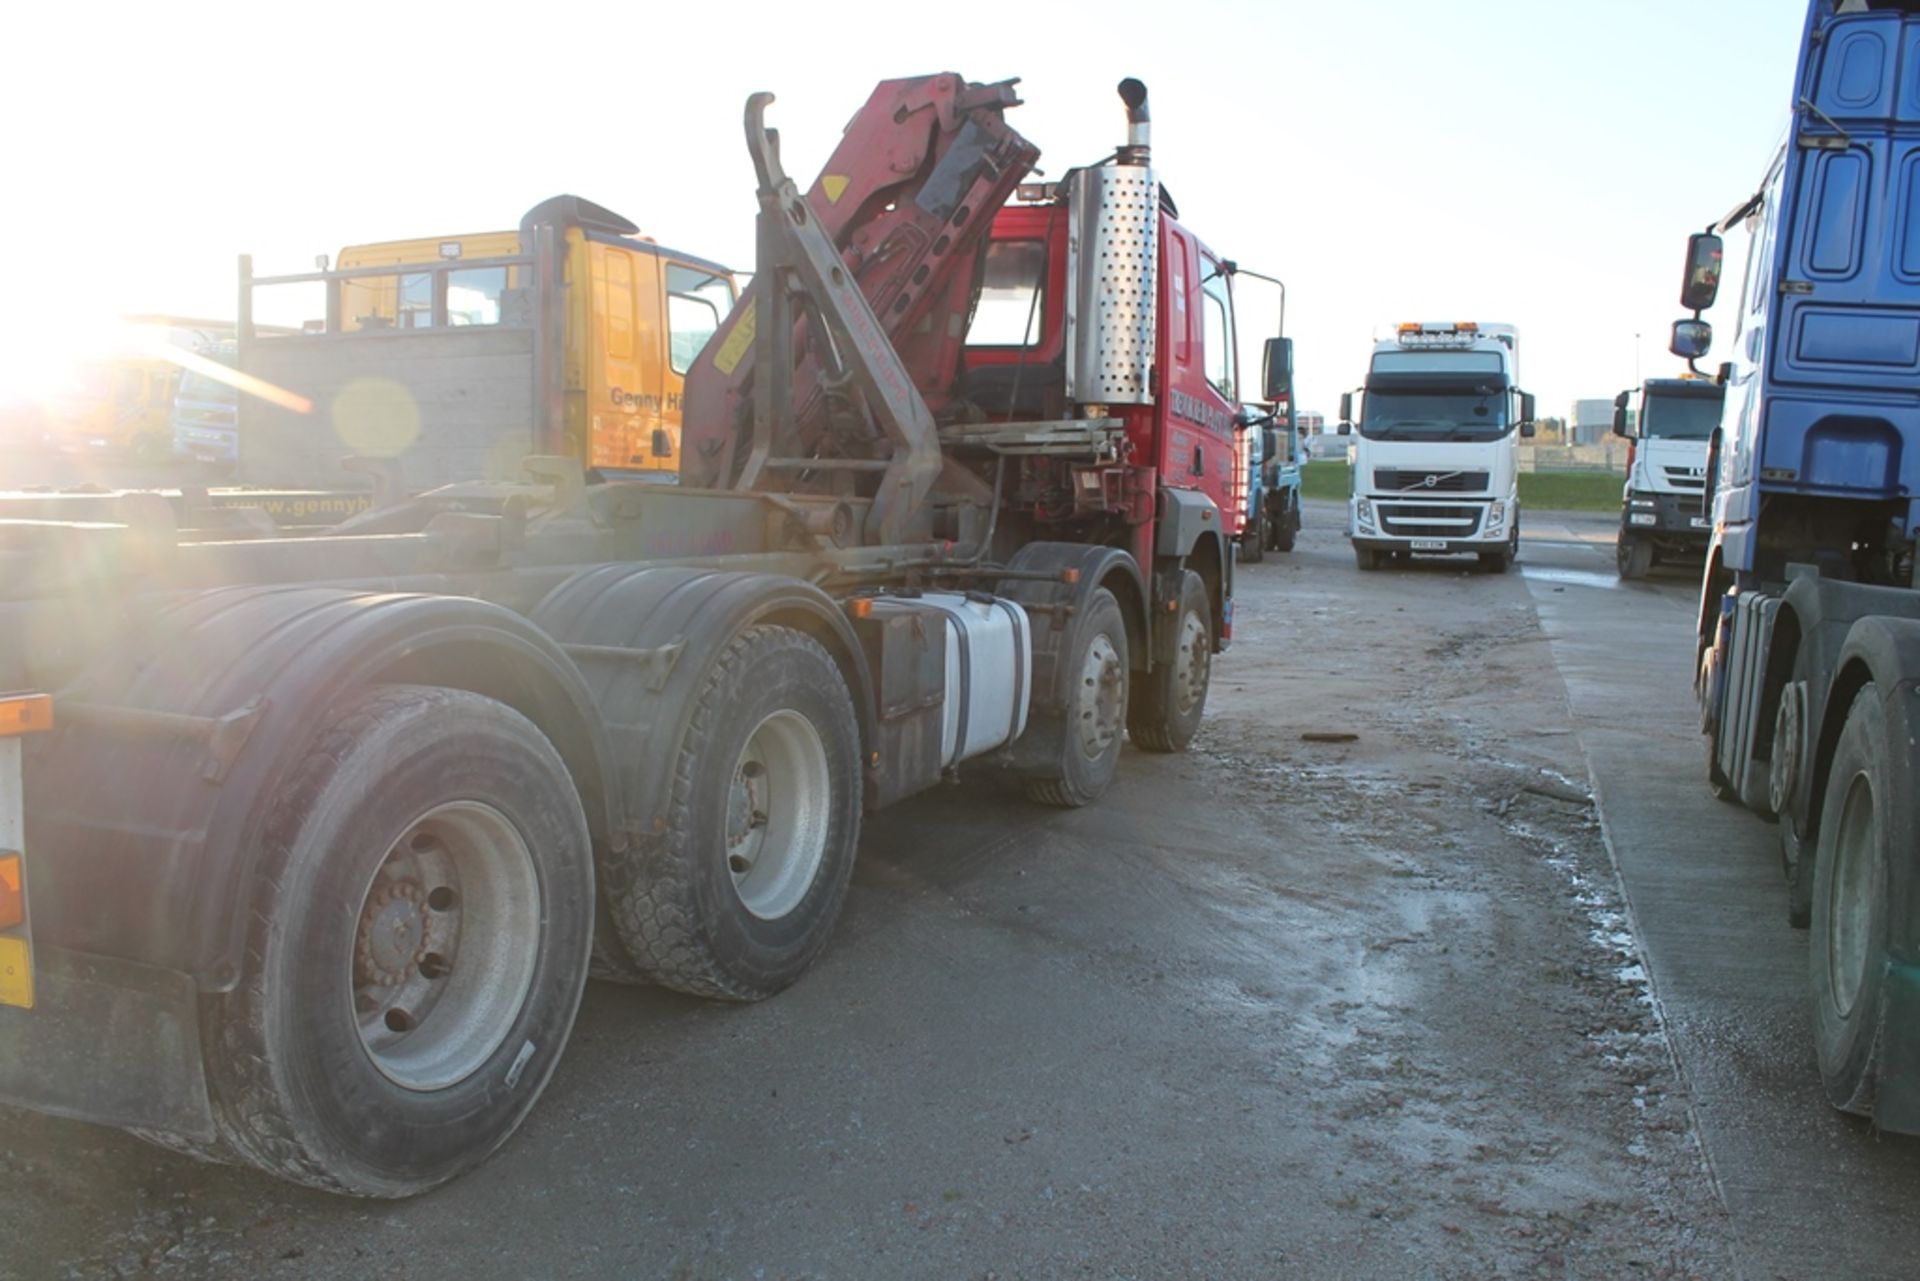 Foden Alpha 3000 A3-8rt 380 Slp - 11000cc Tractor - Image 3 of 4